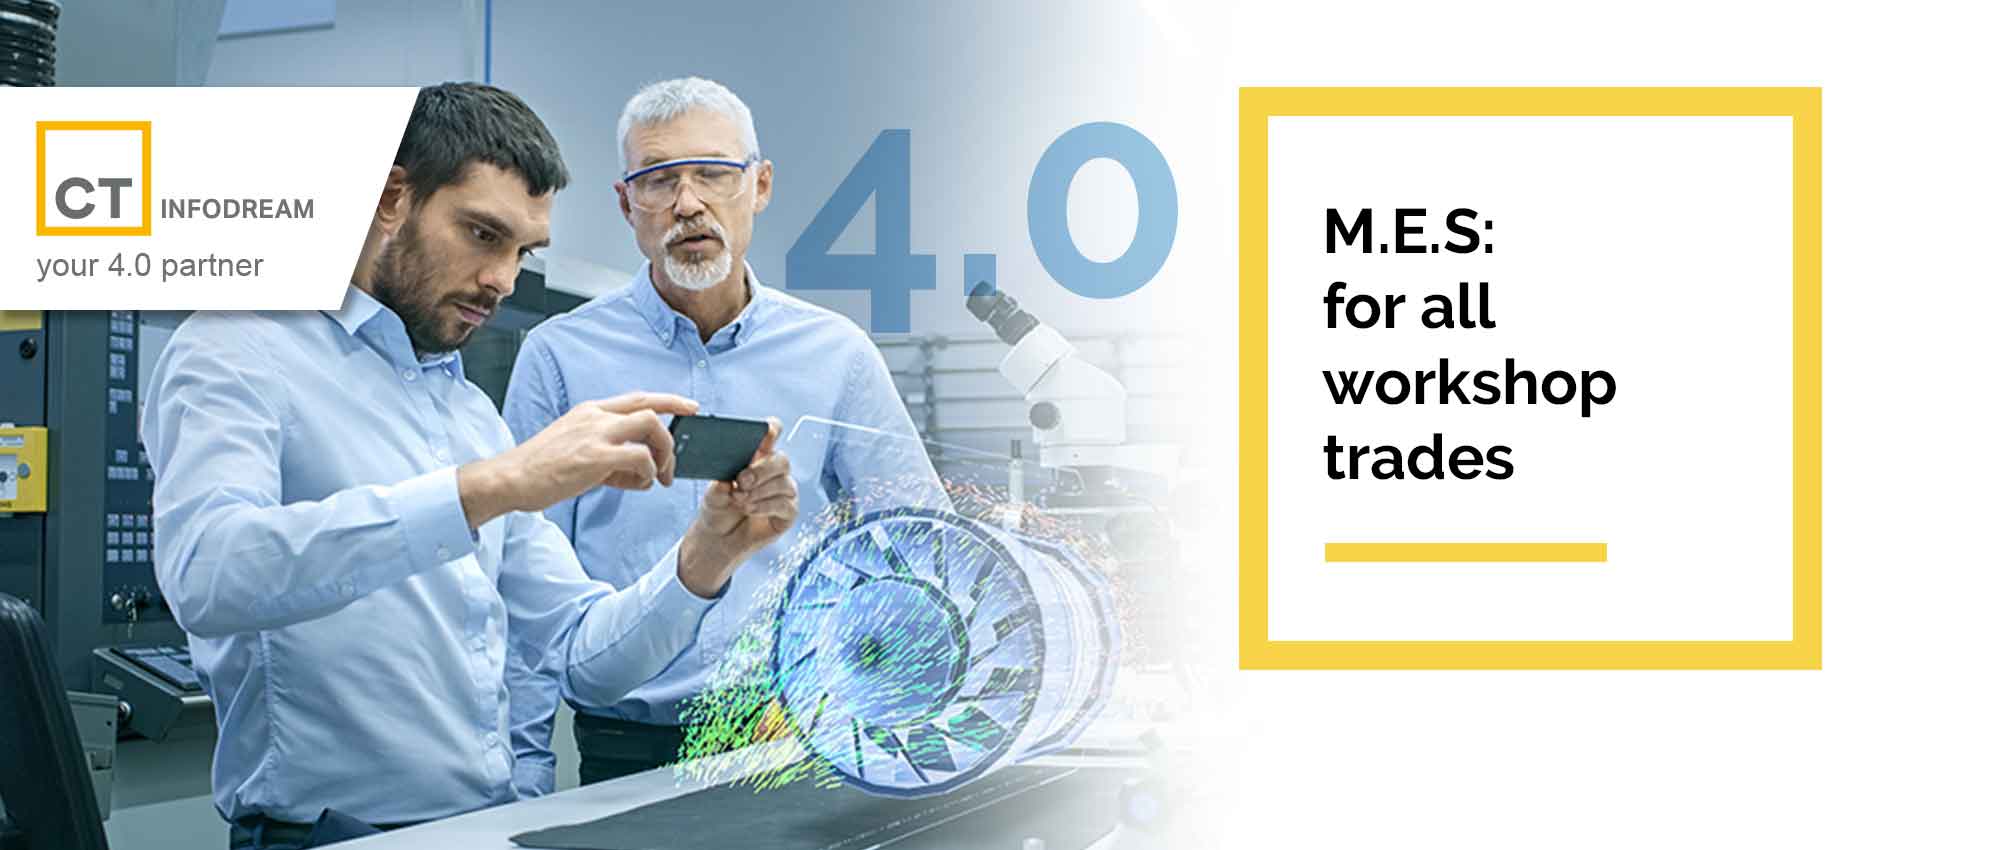 The benefits of MES (Manufacturing Execution System) by trade